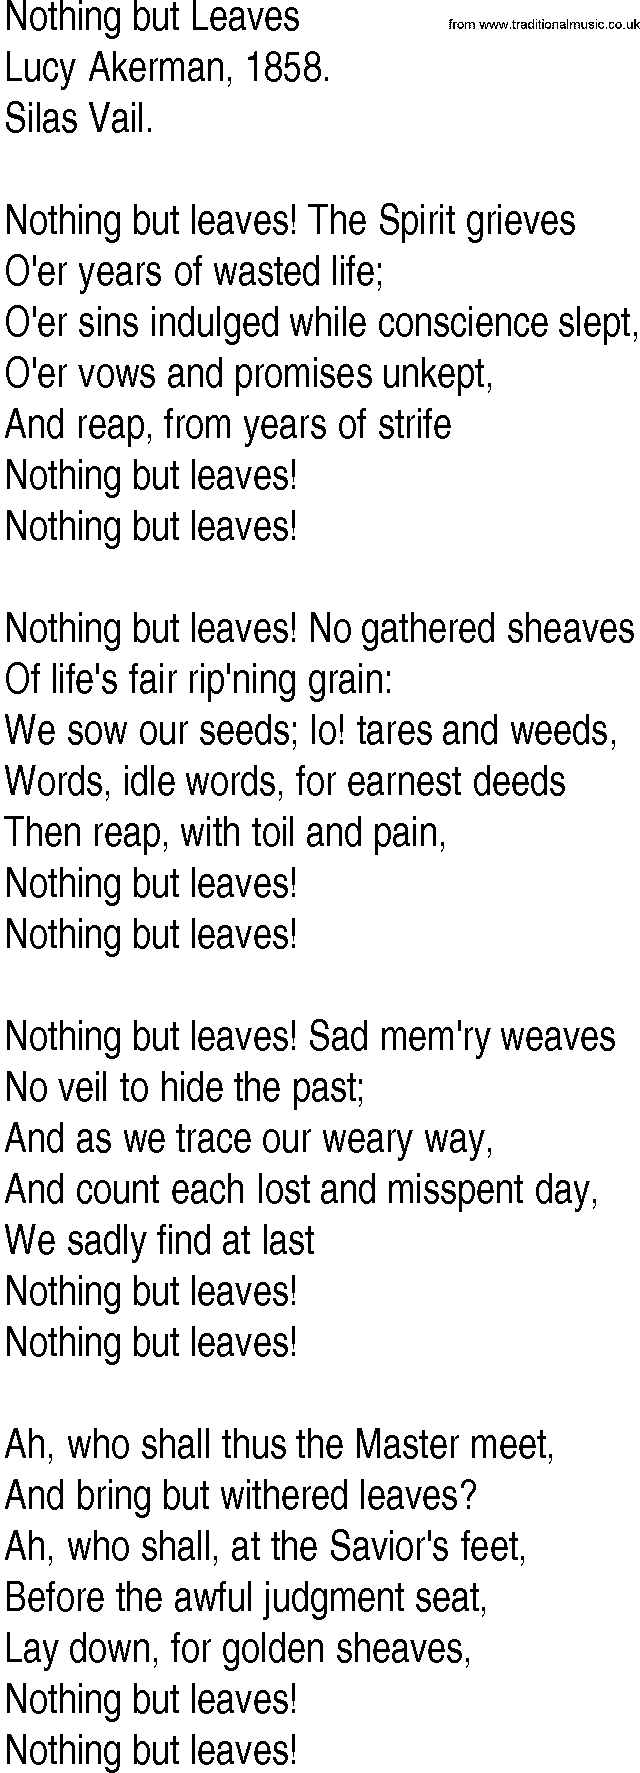 Hymn and Gospel Song: Nothing but Leaves by Lucy Akerman lyrics